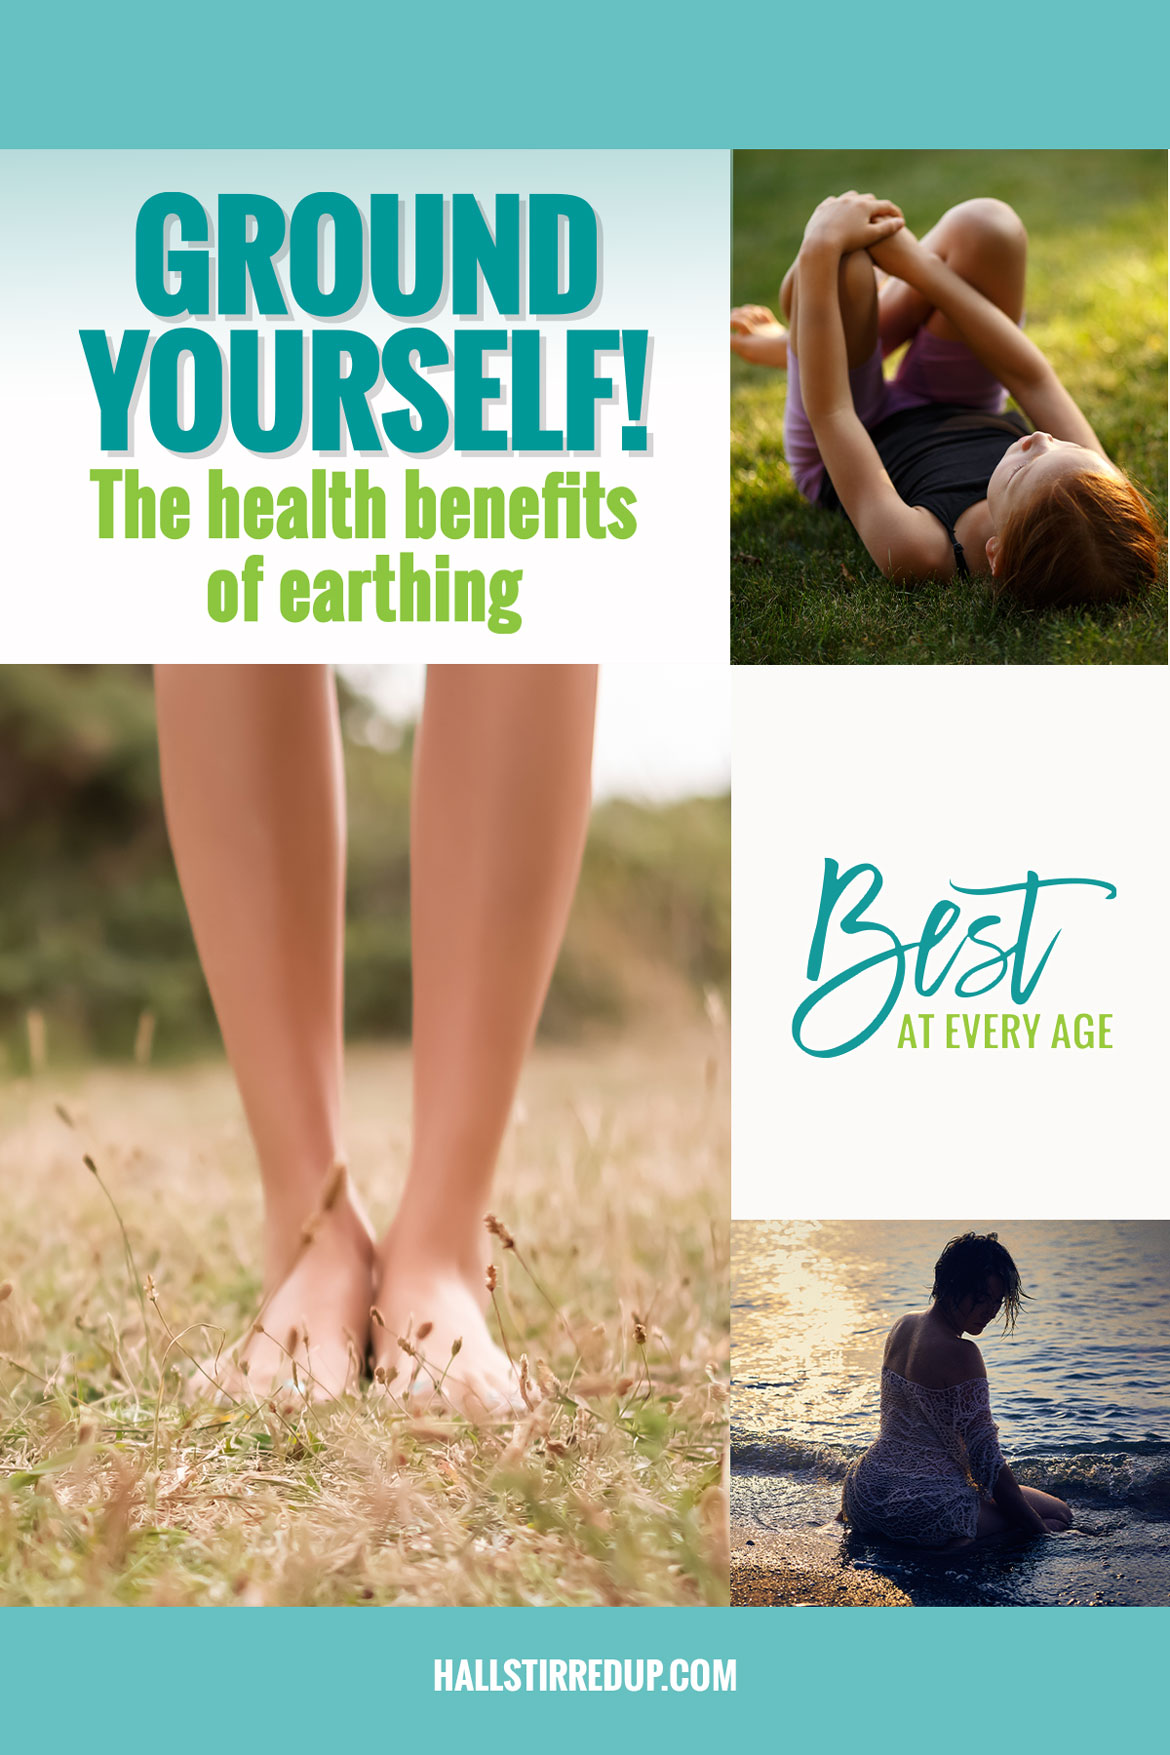 Ground yourself The health benefits of earthing